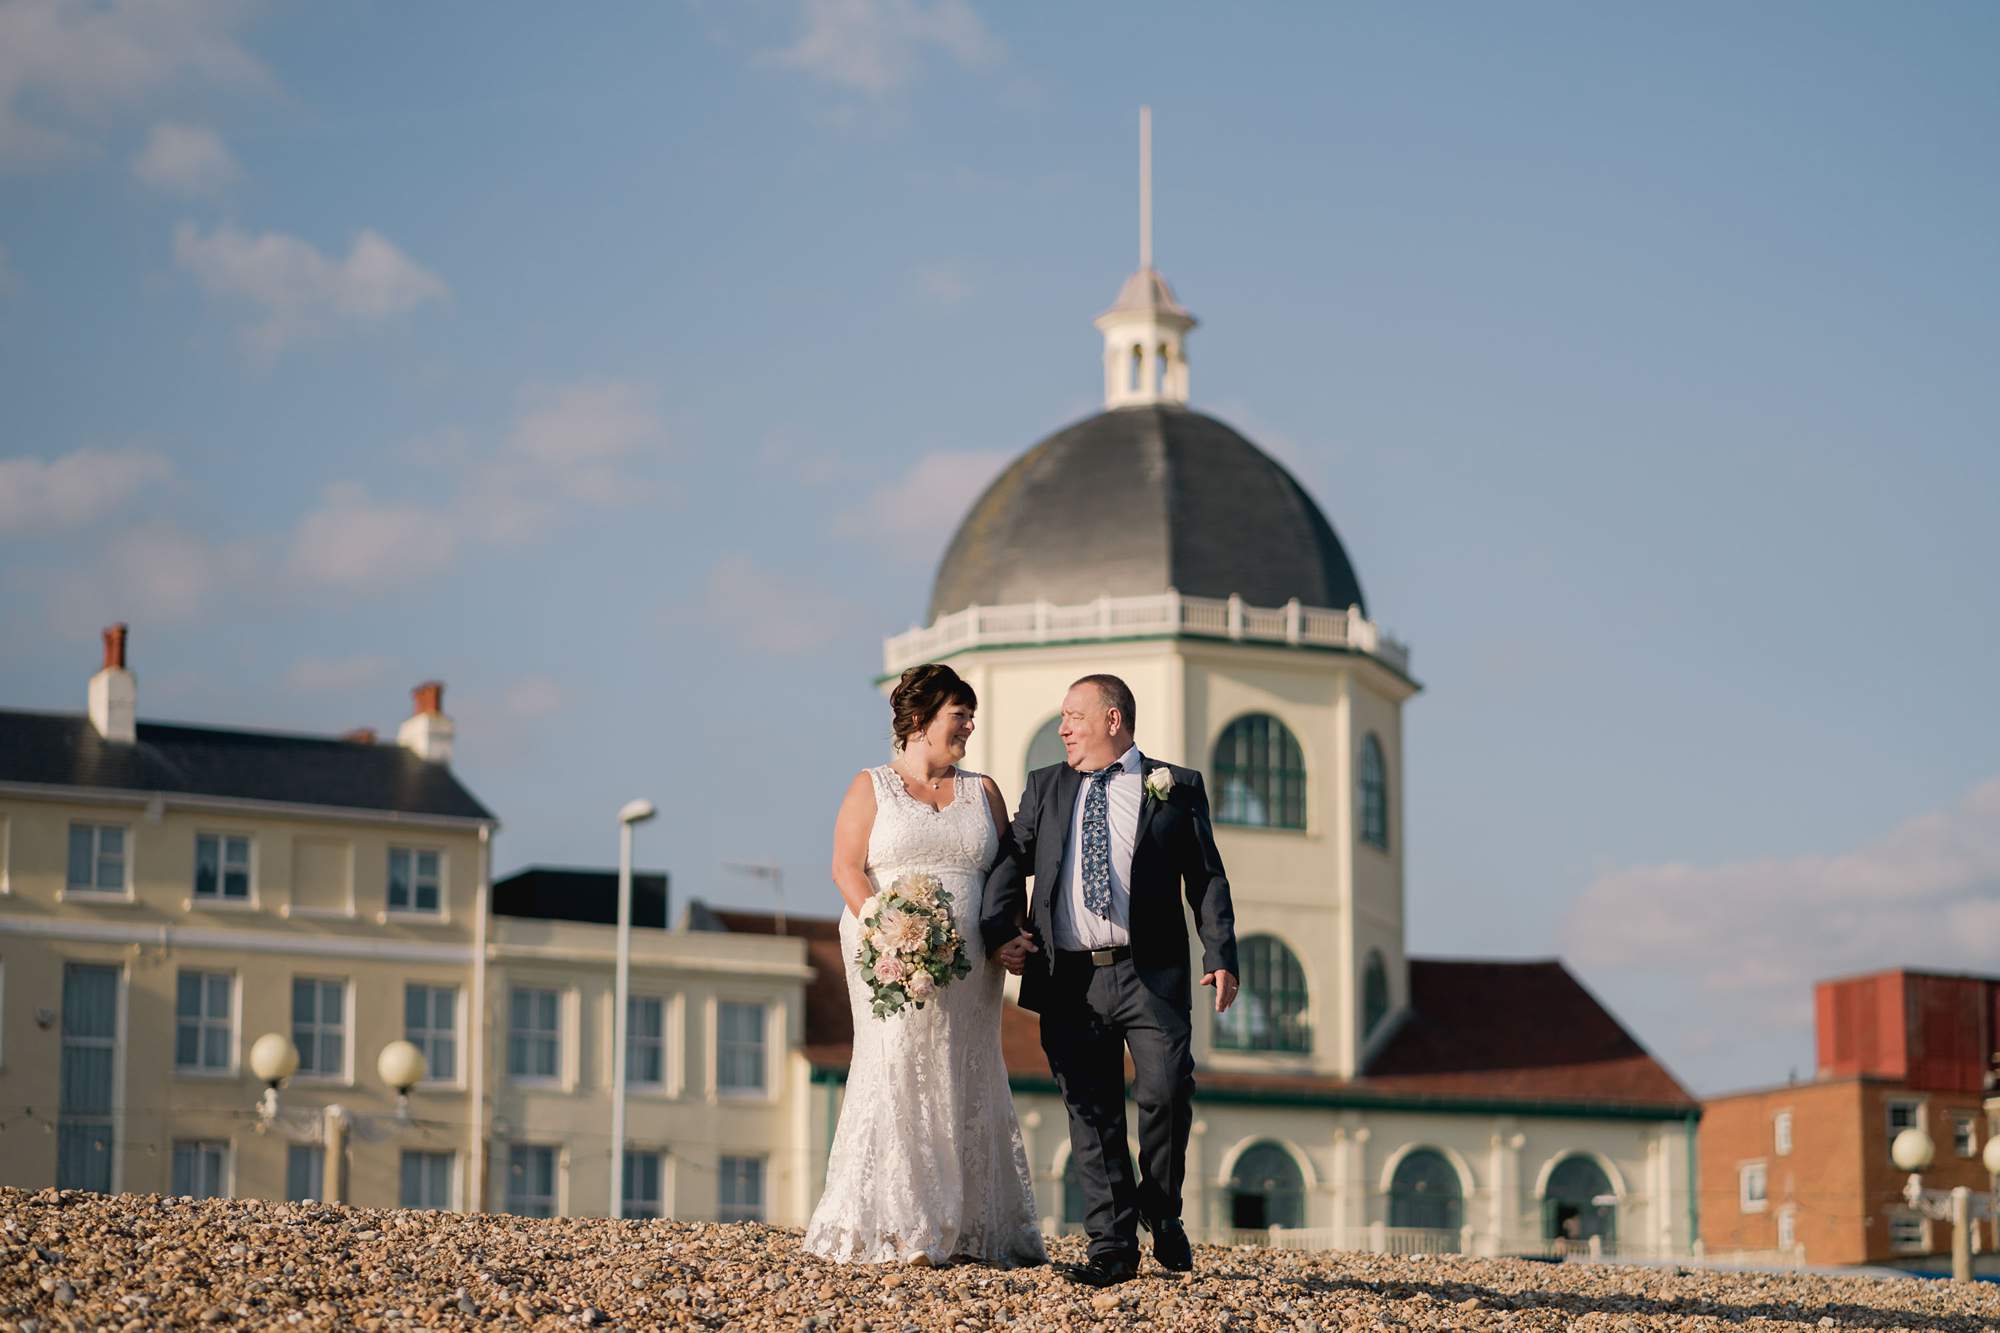 Karin and Rob's Wedding at Worthing Dome Cinema in Sussex